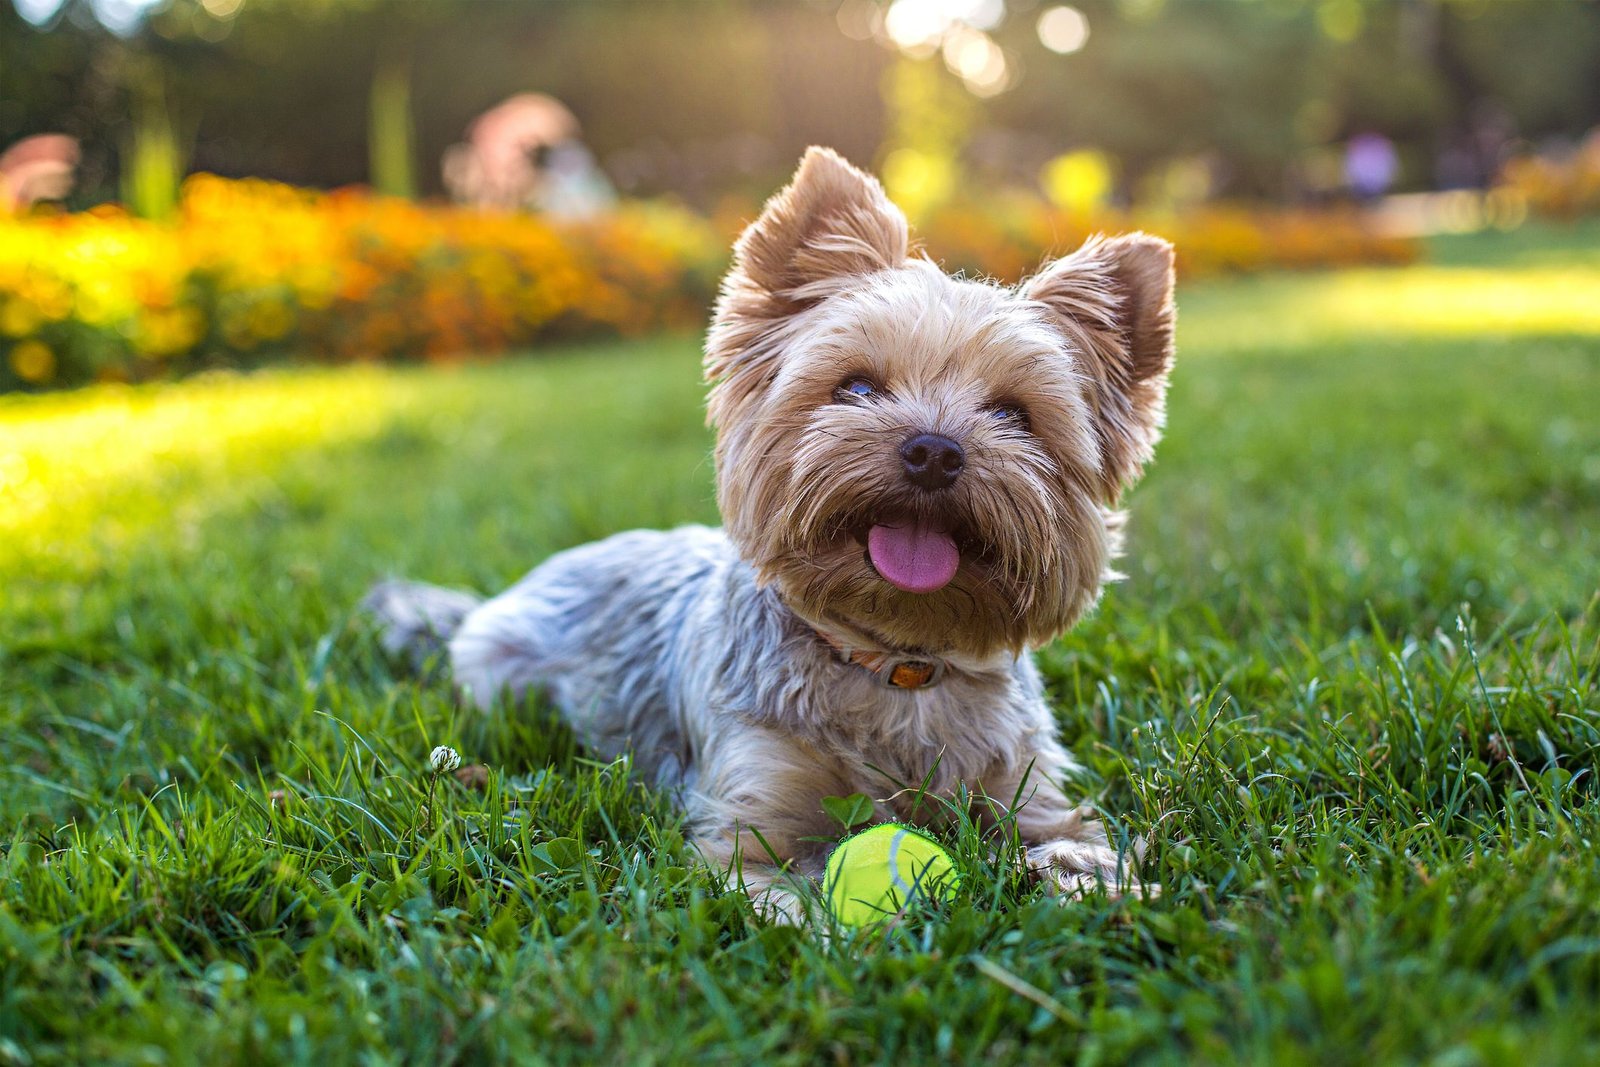 13 Dog Breeds That Thrive in Hot Weather